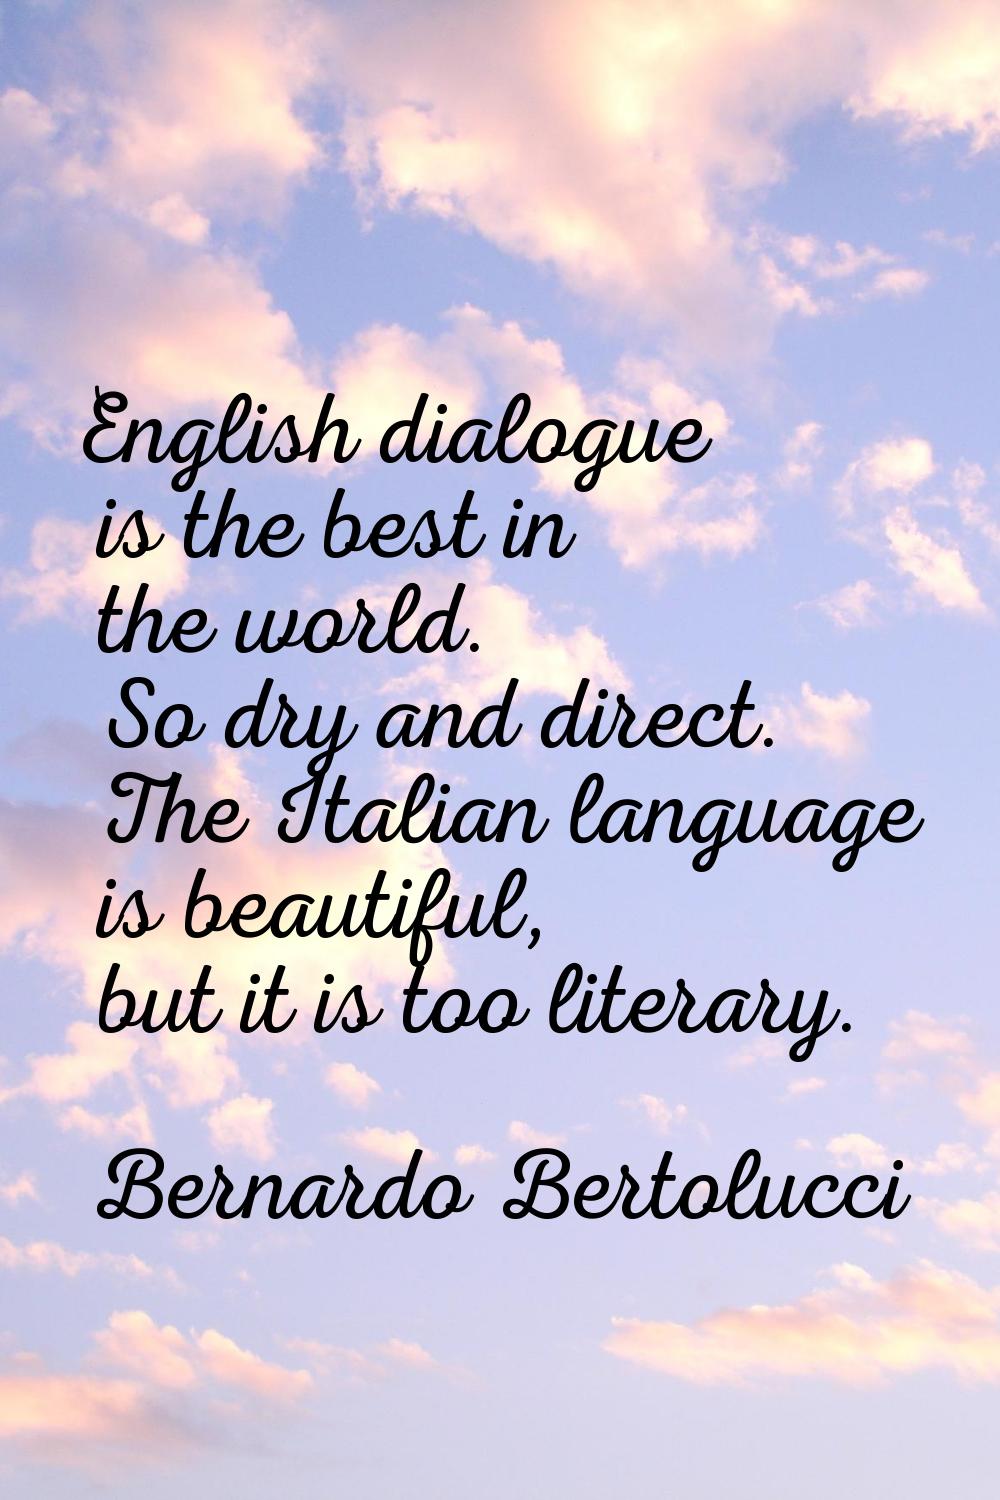 English dialogue is the best in the world. So dry and direct. The Italian language is beautiful, bu